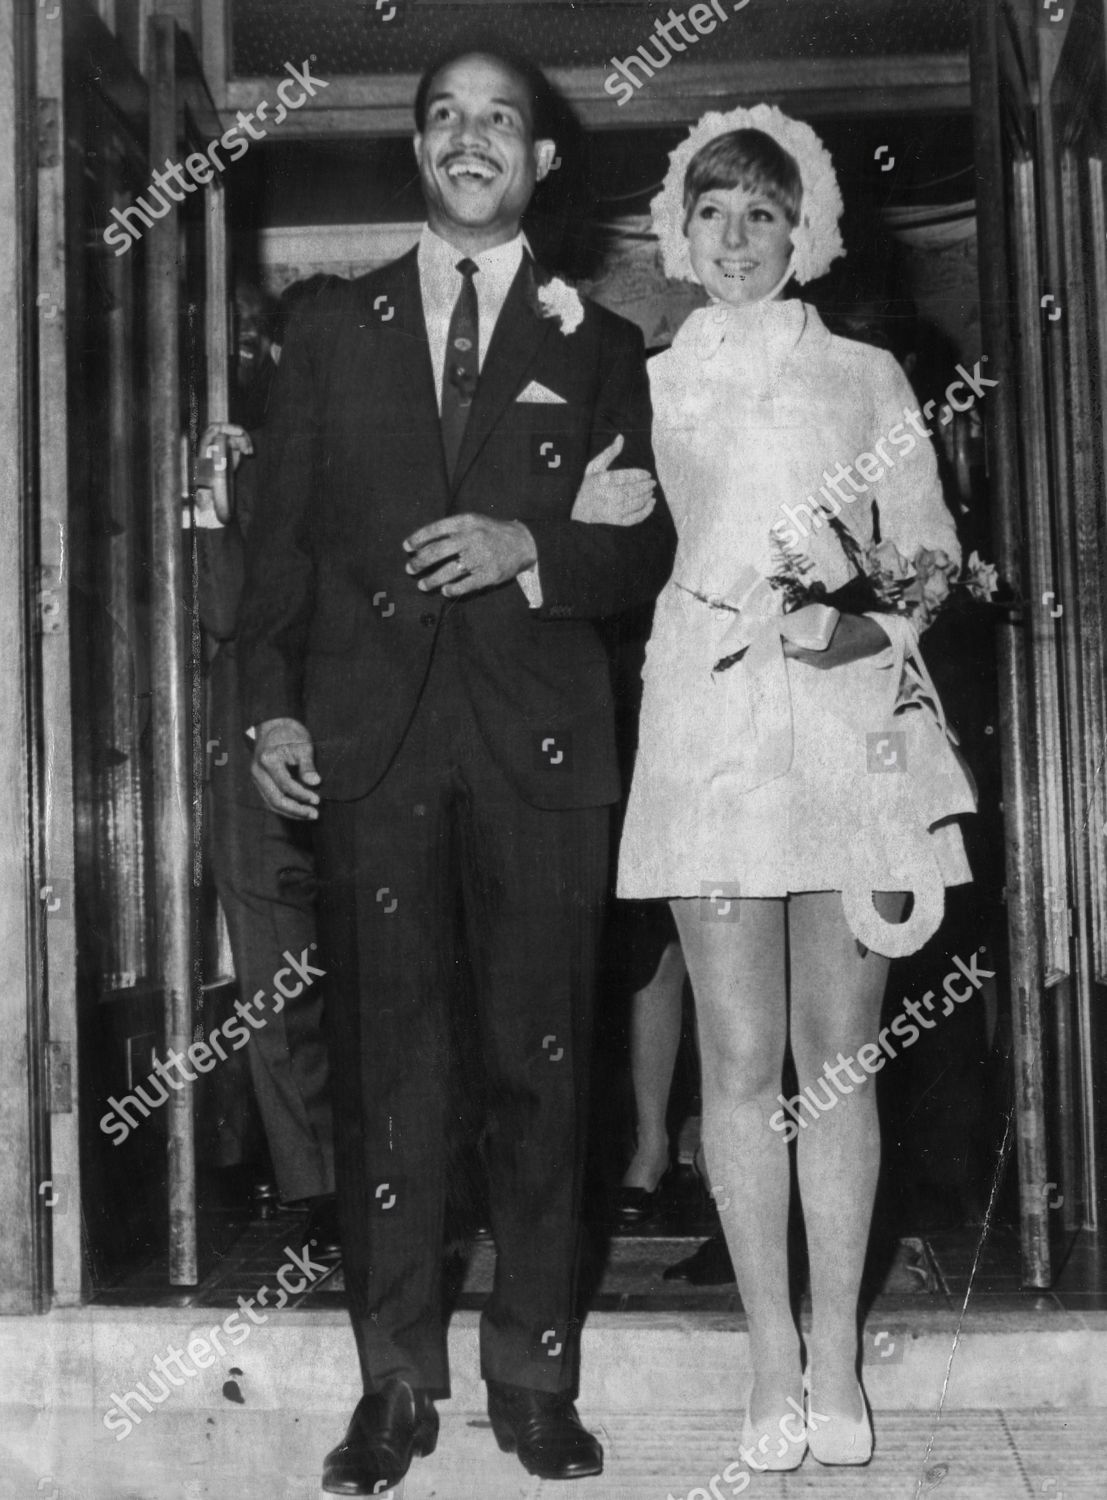 https://editorial01.shutterstock.com/wm-preview-1500/3029117a/9c79984b/sir-garry-garfield-sobers-and-lady-prudence-kirby-stand-arm-in-arm-on-the-steps-of-basford-registry-office-in-nottingham-after-their-wedding-ceremony-garry-wears-a-typical-smart-black-suit-whilst-his-bride-wears-a-short-white-coat-dress-with-white-shutterstock-editorial-3029117a.jpg